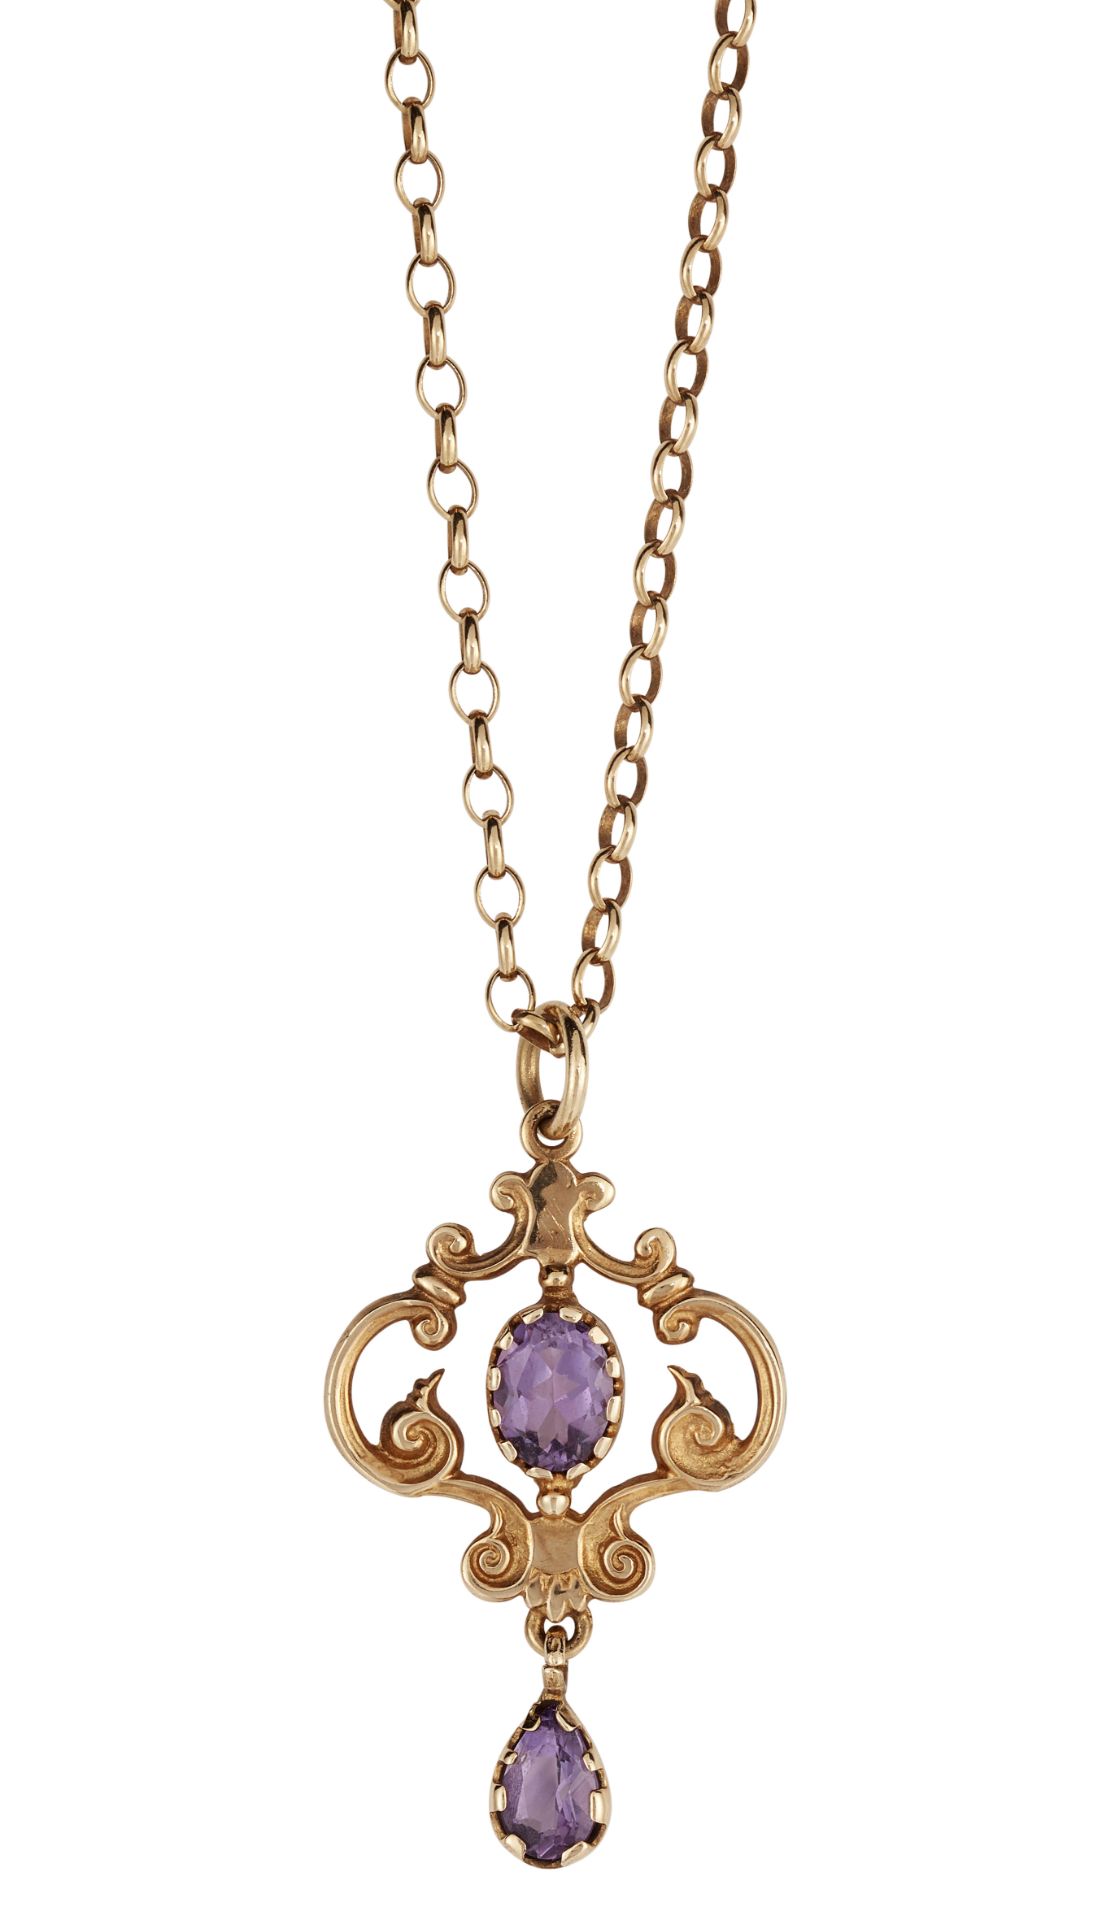 A 9CT AMETHYST PENDANT AND CHAIN